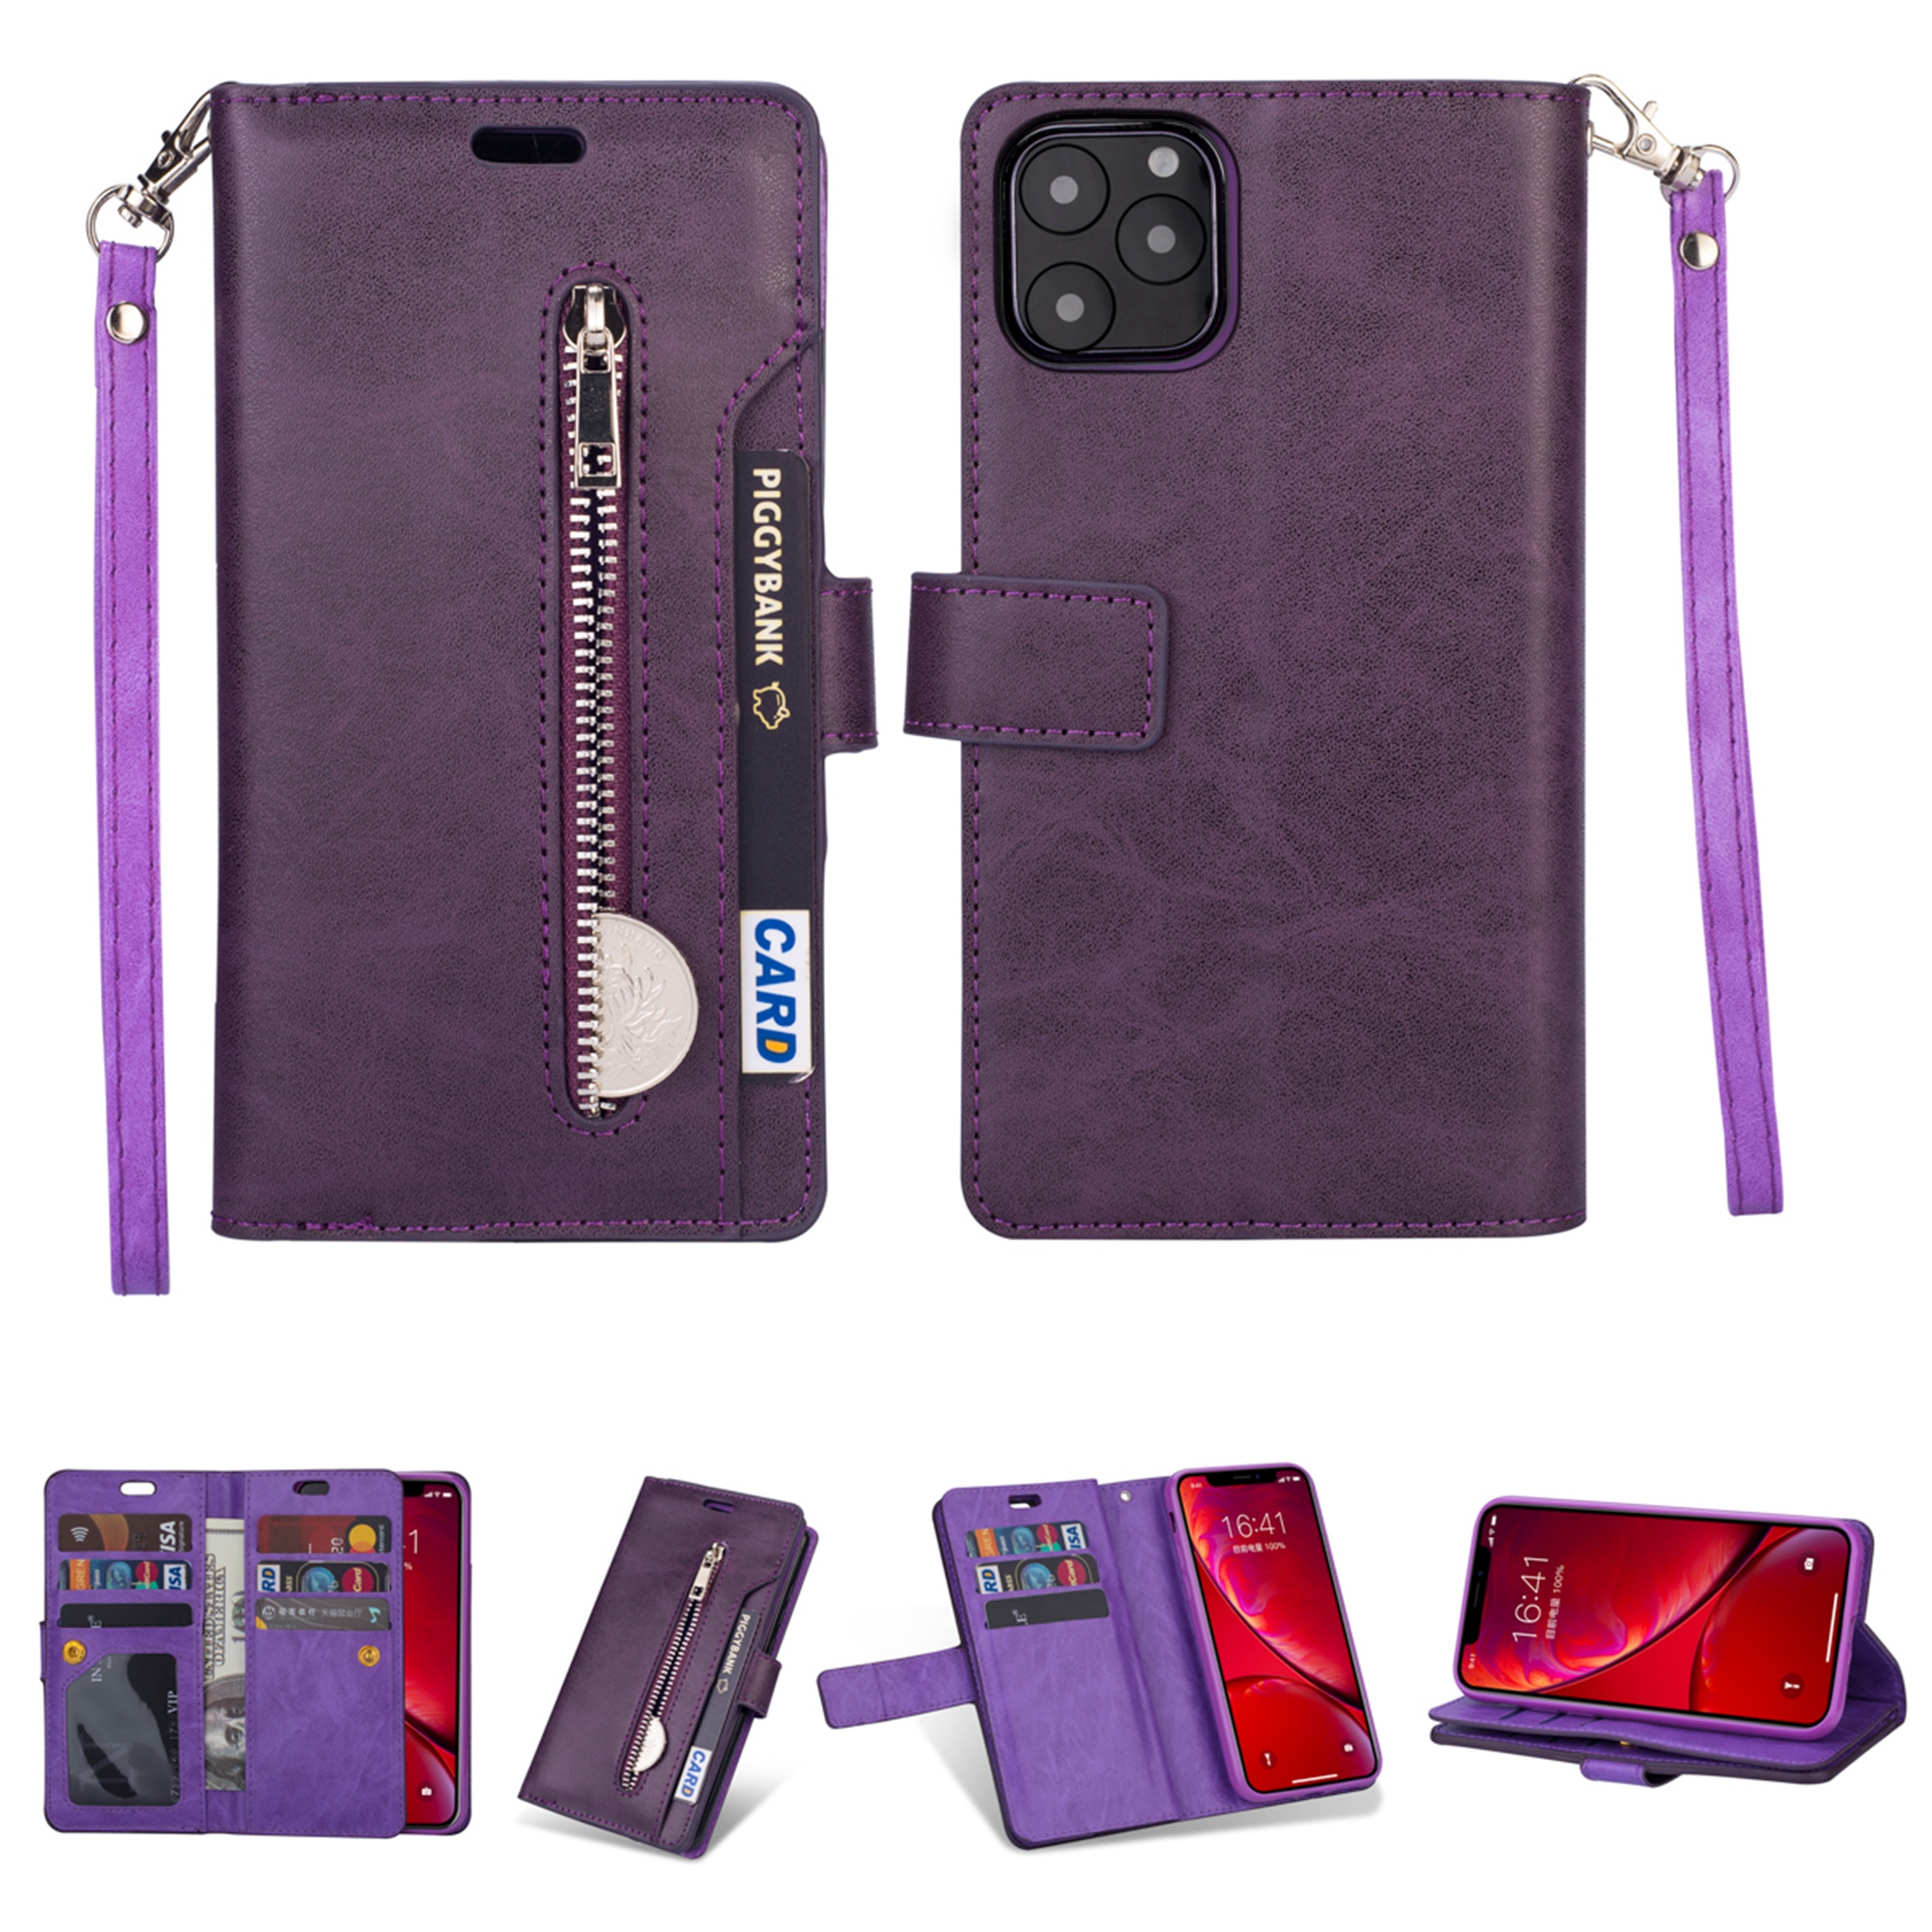 iPhone 11 Pro Max 6.5 inch Wallet Case, Dteck 9 Card Slots Premium Leather Zipper Purse case Flip Kickstand Folio Magnetic with Wrist Strap Credit Cash Cover For Apple iPhone 11 Pro Max, Purple - image 1 of 7